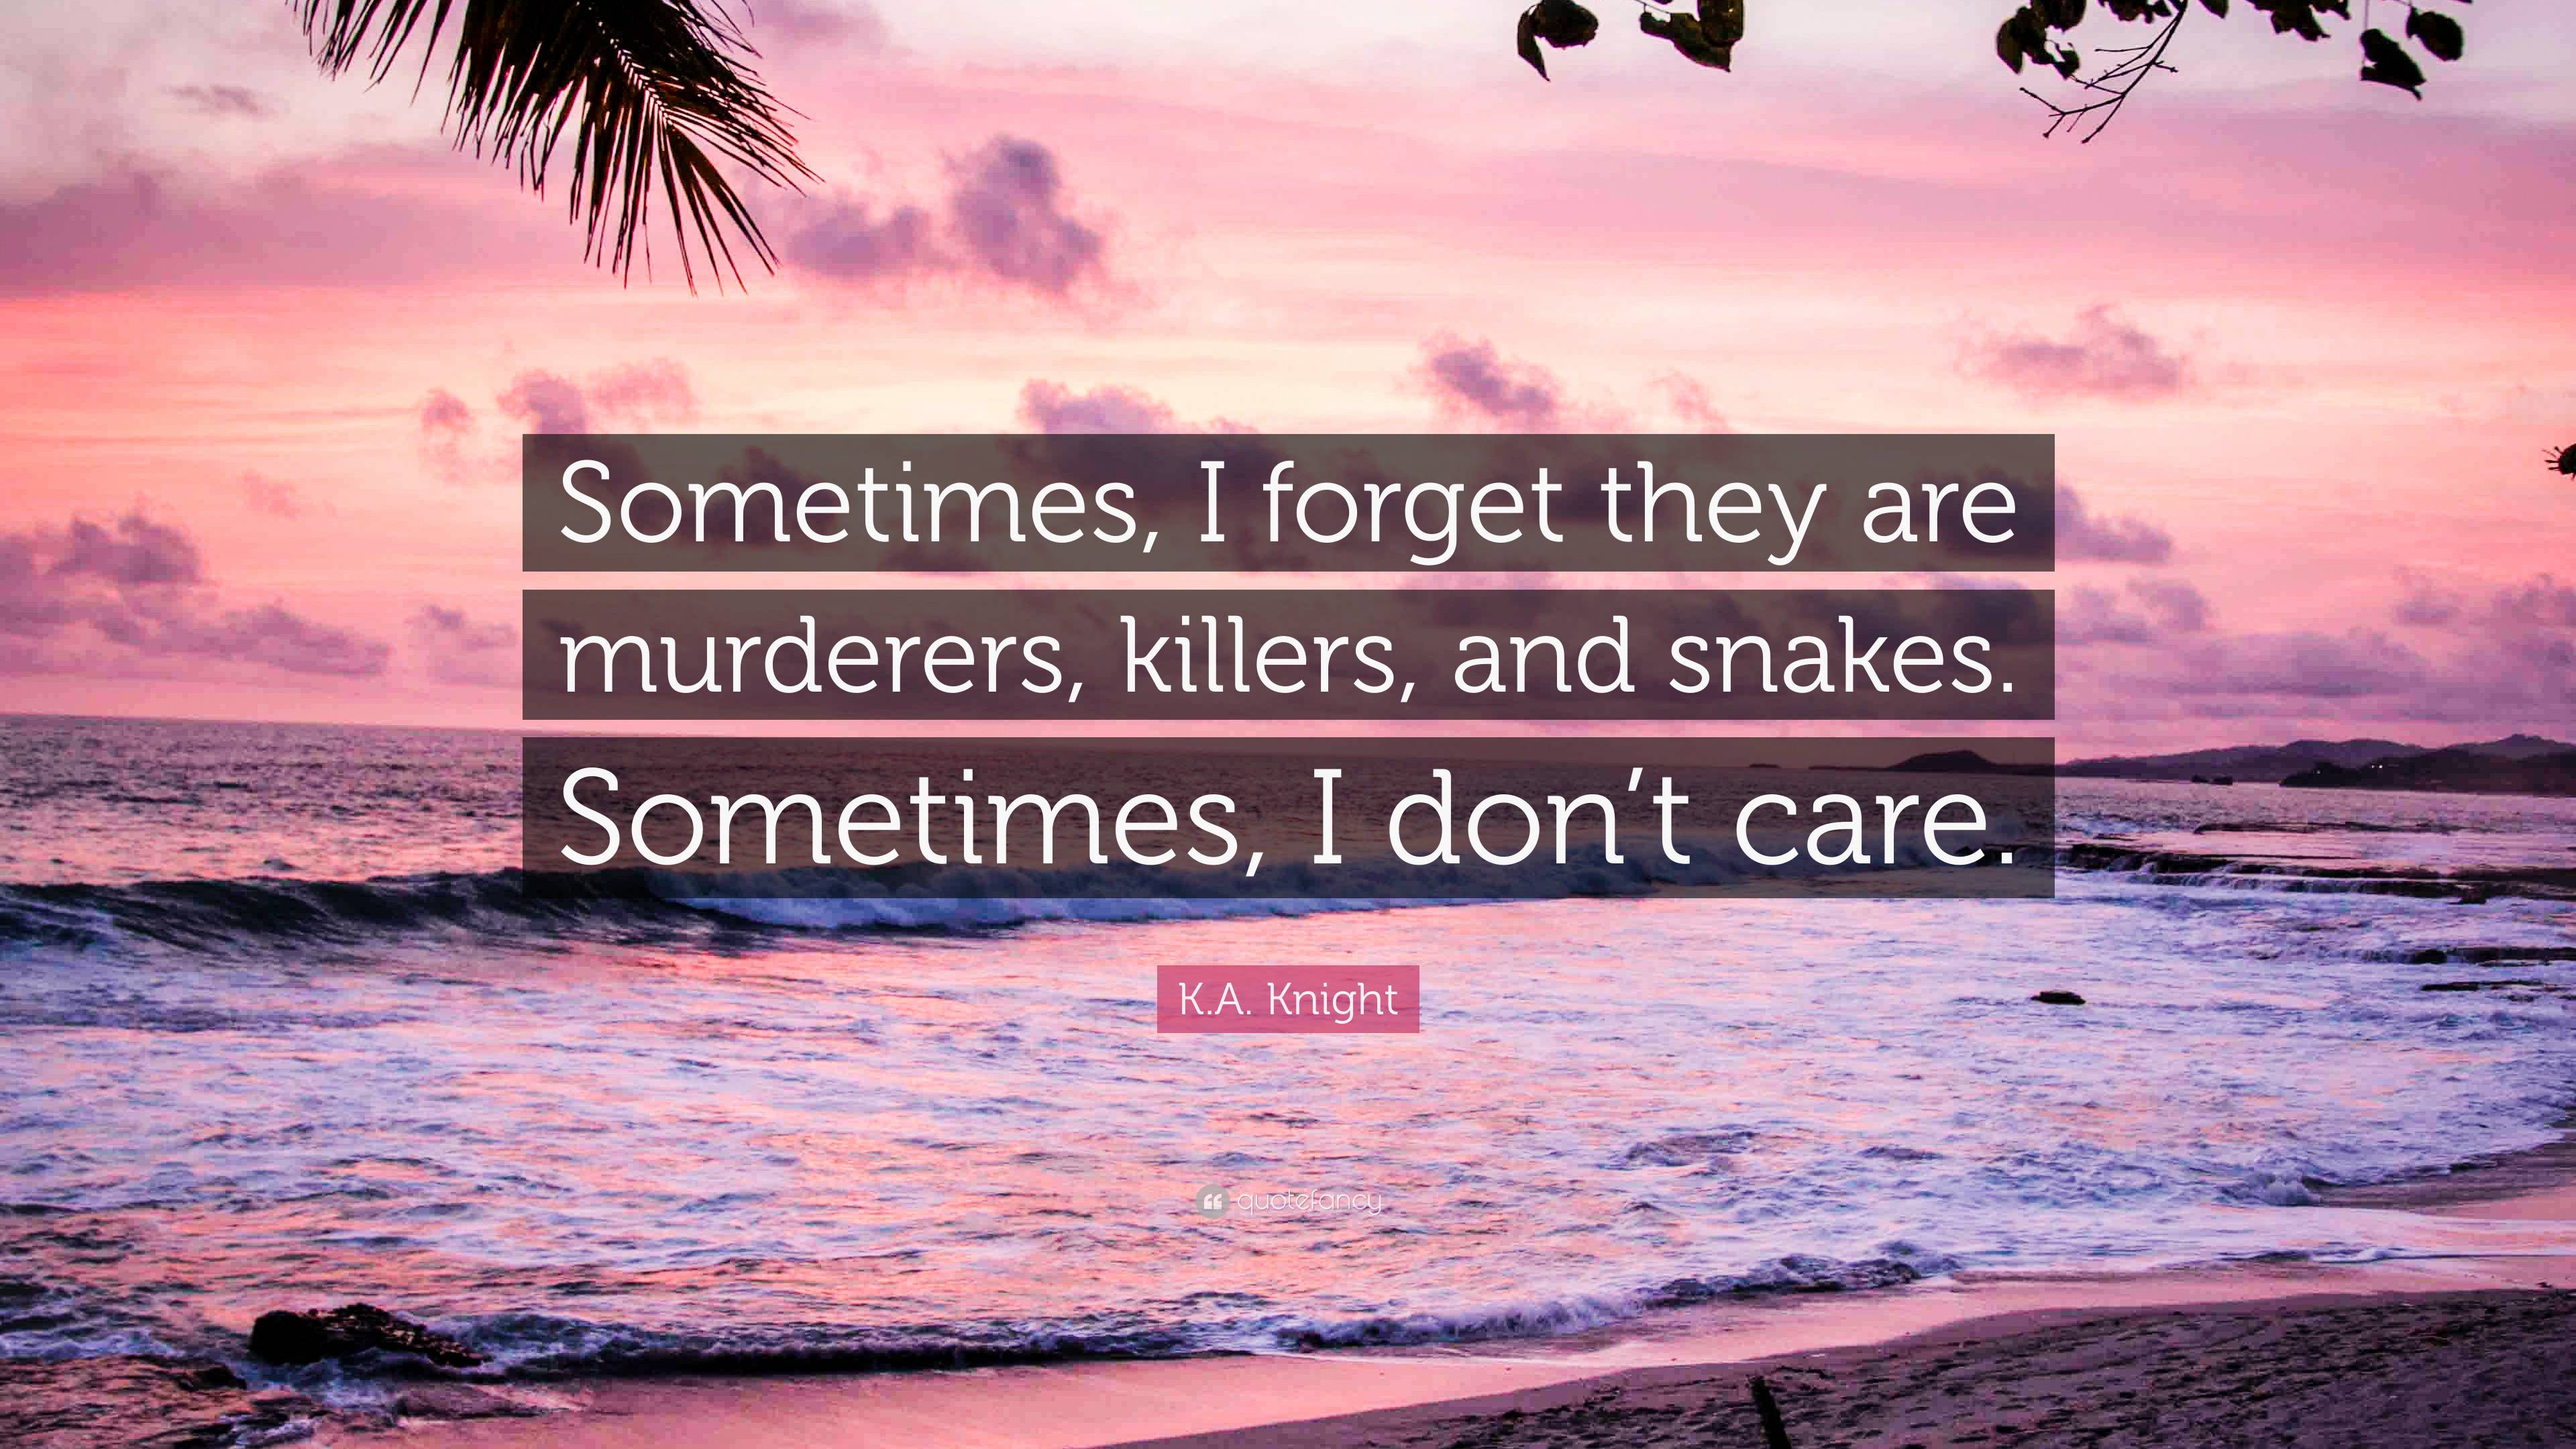 K.A. Knight Quote: “Sometimes, I forget they are murderers, killers ...